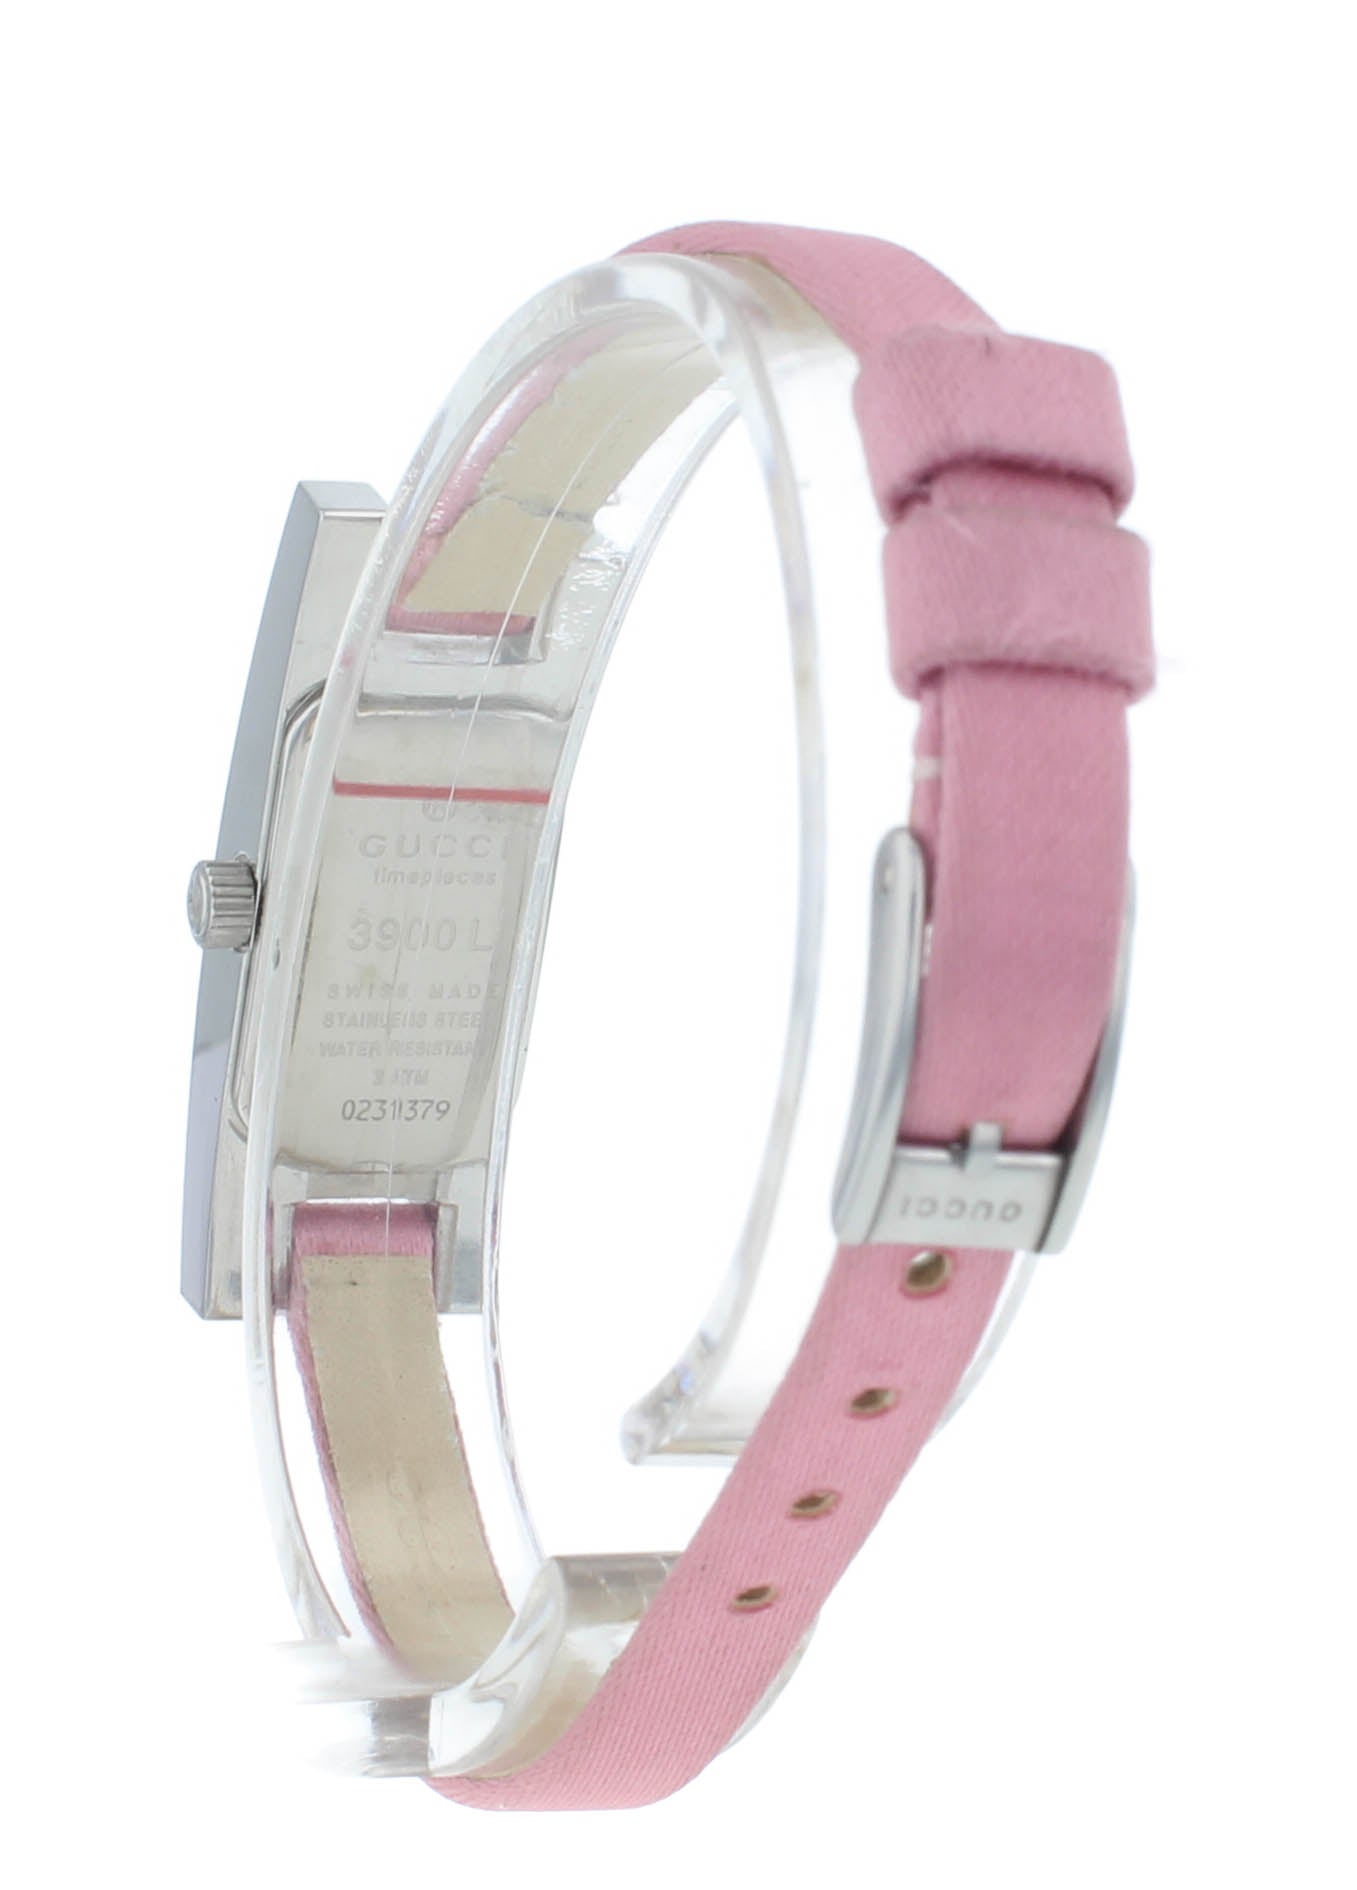 Pre-Owned Gucci 3900L Quartz Stainless Steel 12mm Pink Dial & Strap Ladies Watch